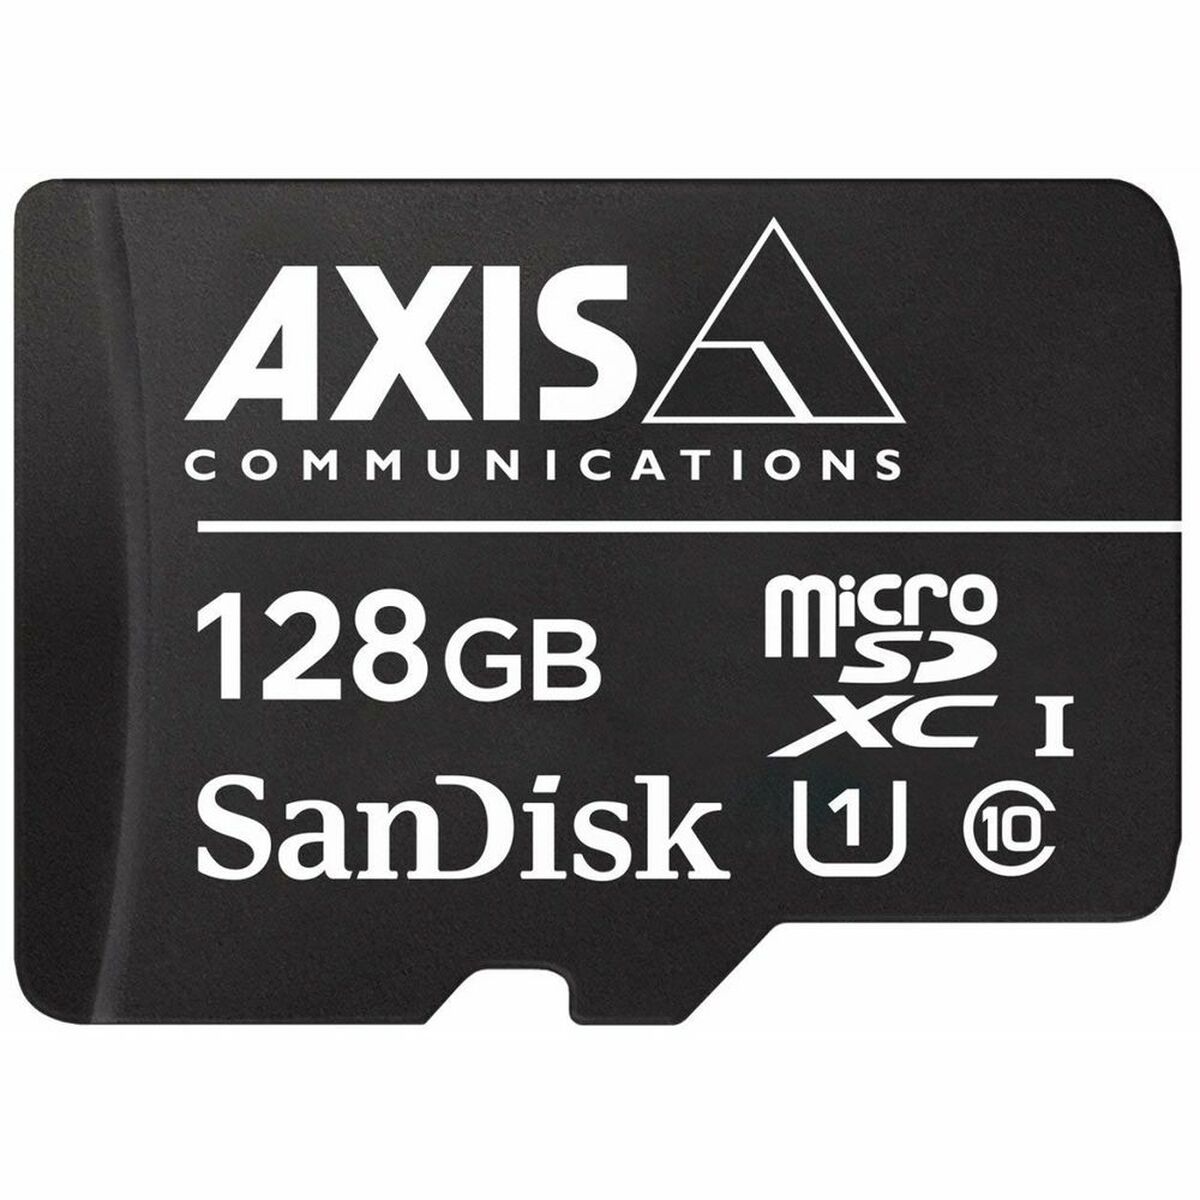 SD Memory Card Axis 01491-001 128GB 128 GB, Axis, Computing, Data storage, sd-memory-card-axis-01491-001-128gb-128-gb, Brand_Axis, category-reference-2609, category-reference-2803, category-reference-2813, category-reference-t-19685, category-reference-t-19909, category-reference-t-21355, category-reference-t-25632, computers / components, Condition_NEW, Price_100 - 200, RiotNook